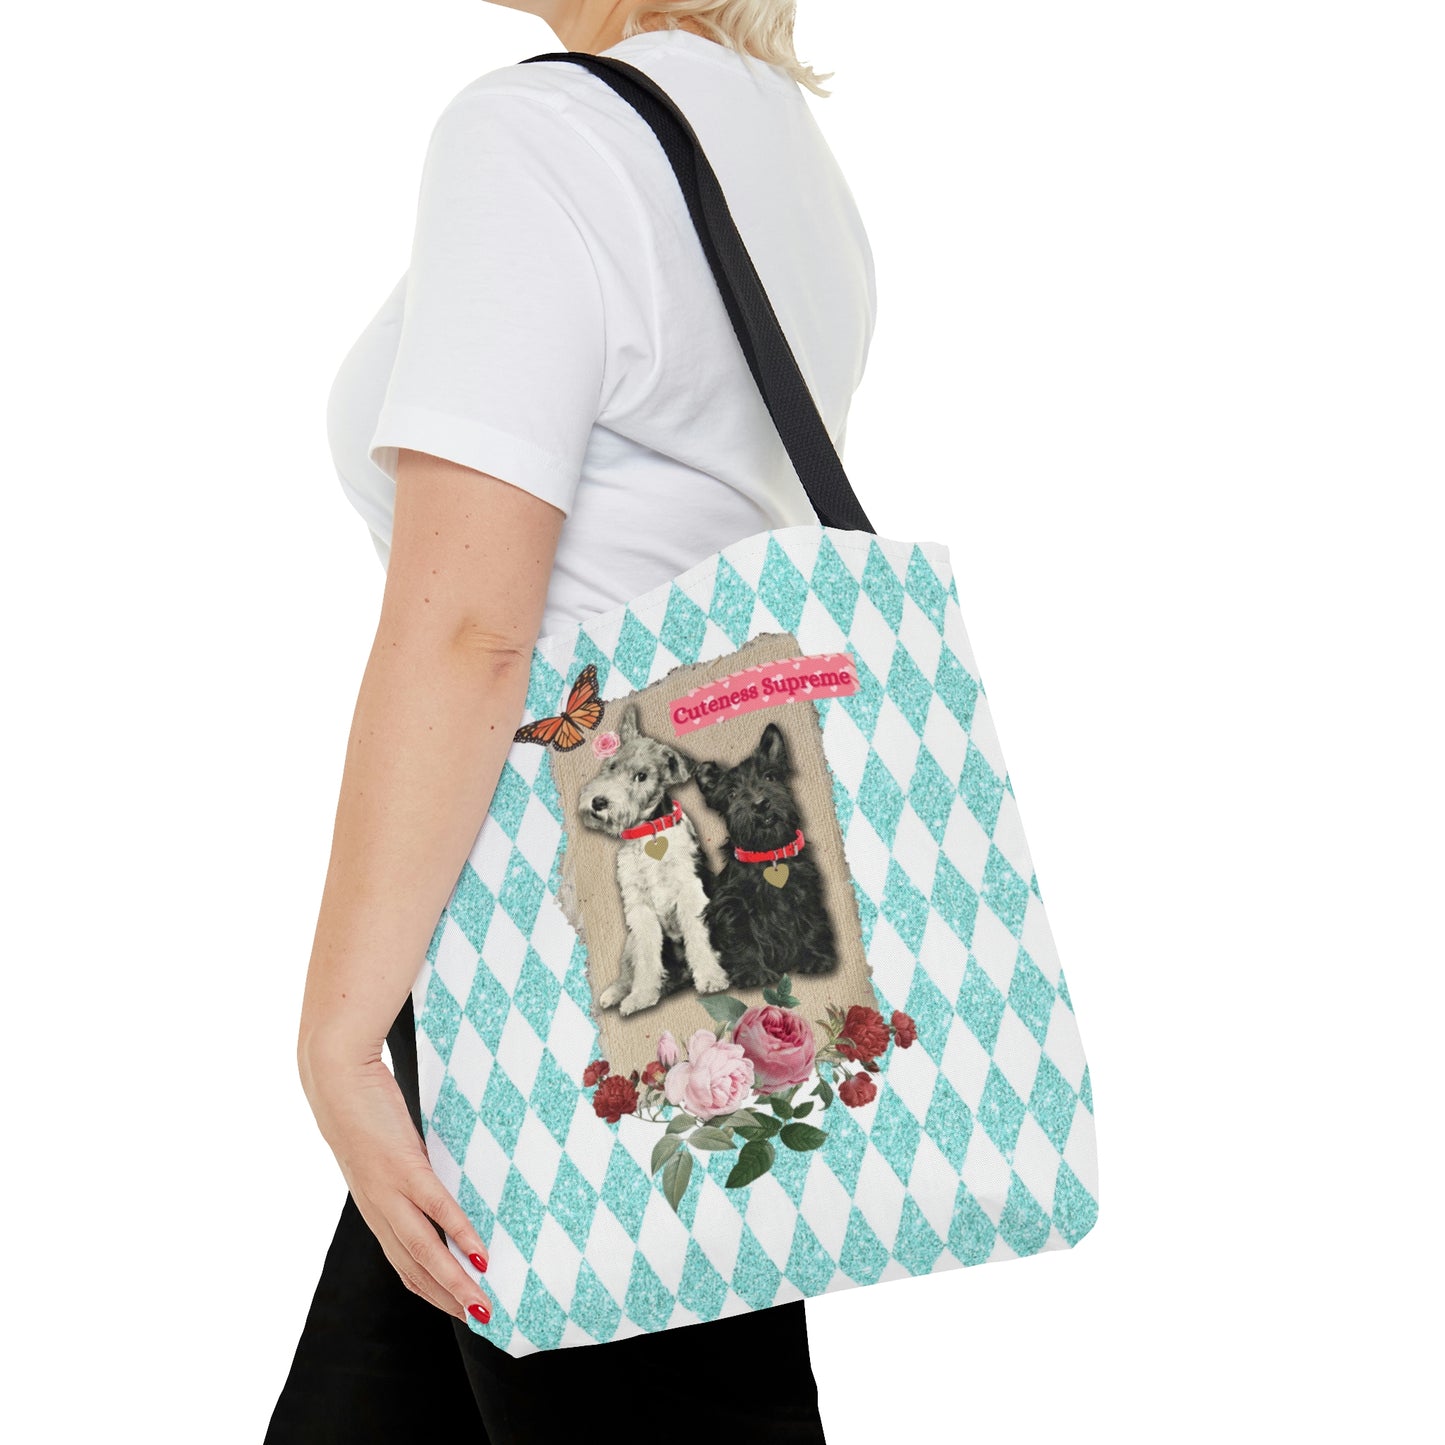 Cute Shopping Tote Bag in 3 Sizes, Aqua Glitter Harlequin Print, Mixed Media Graphic, Vintage Photo Jack Russell Terrier, Scotty Dog, Roses